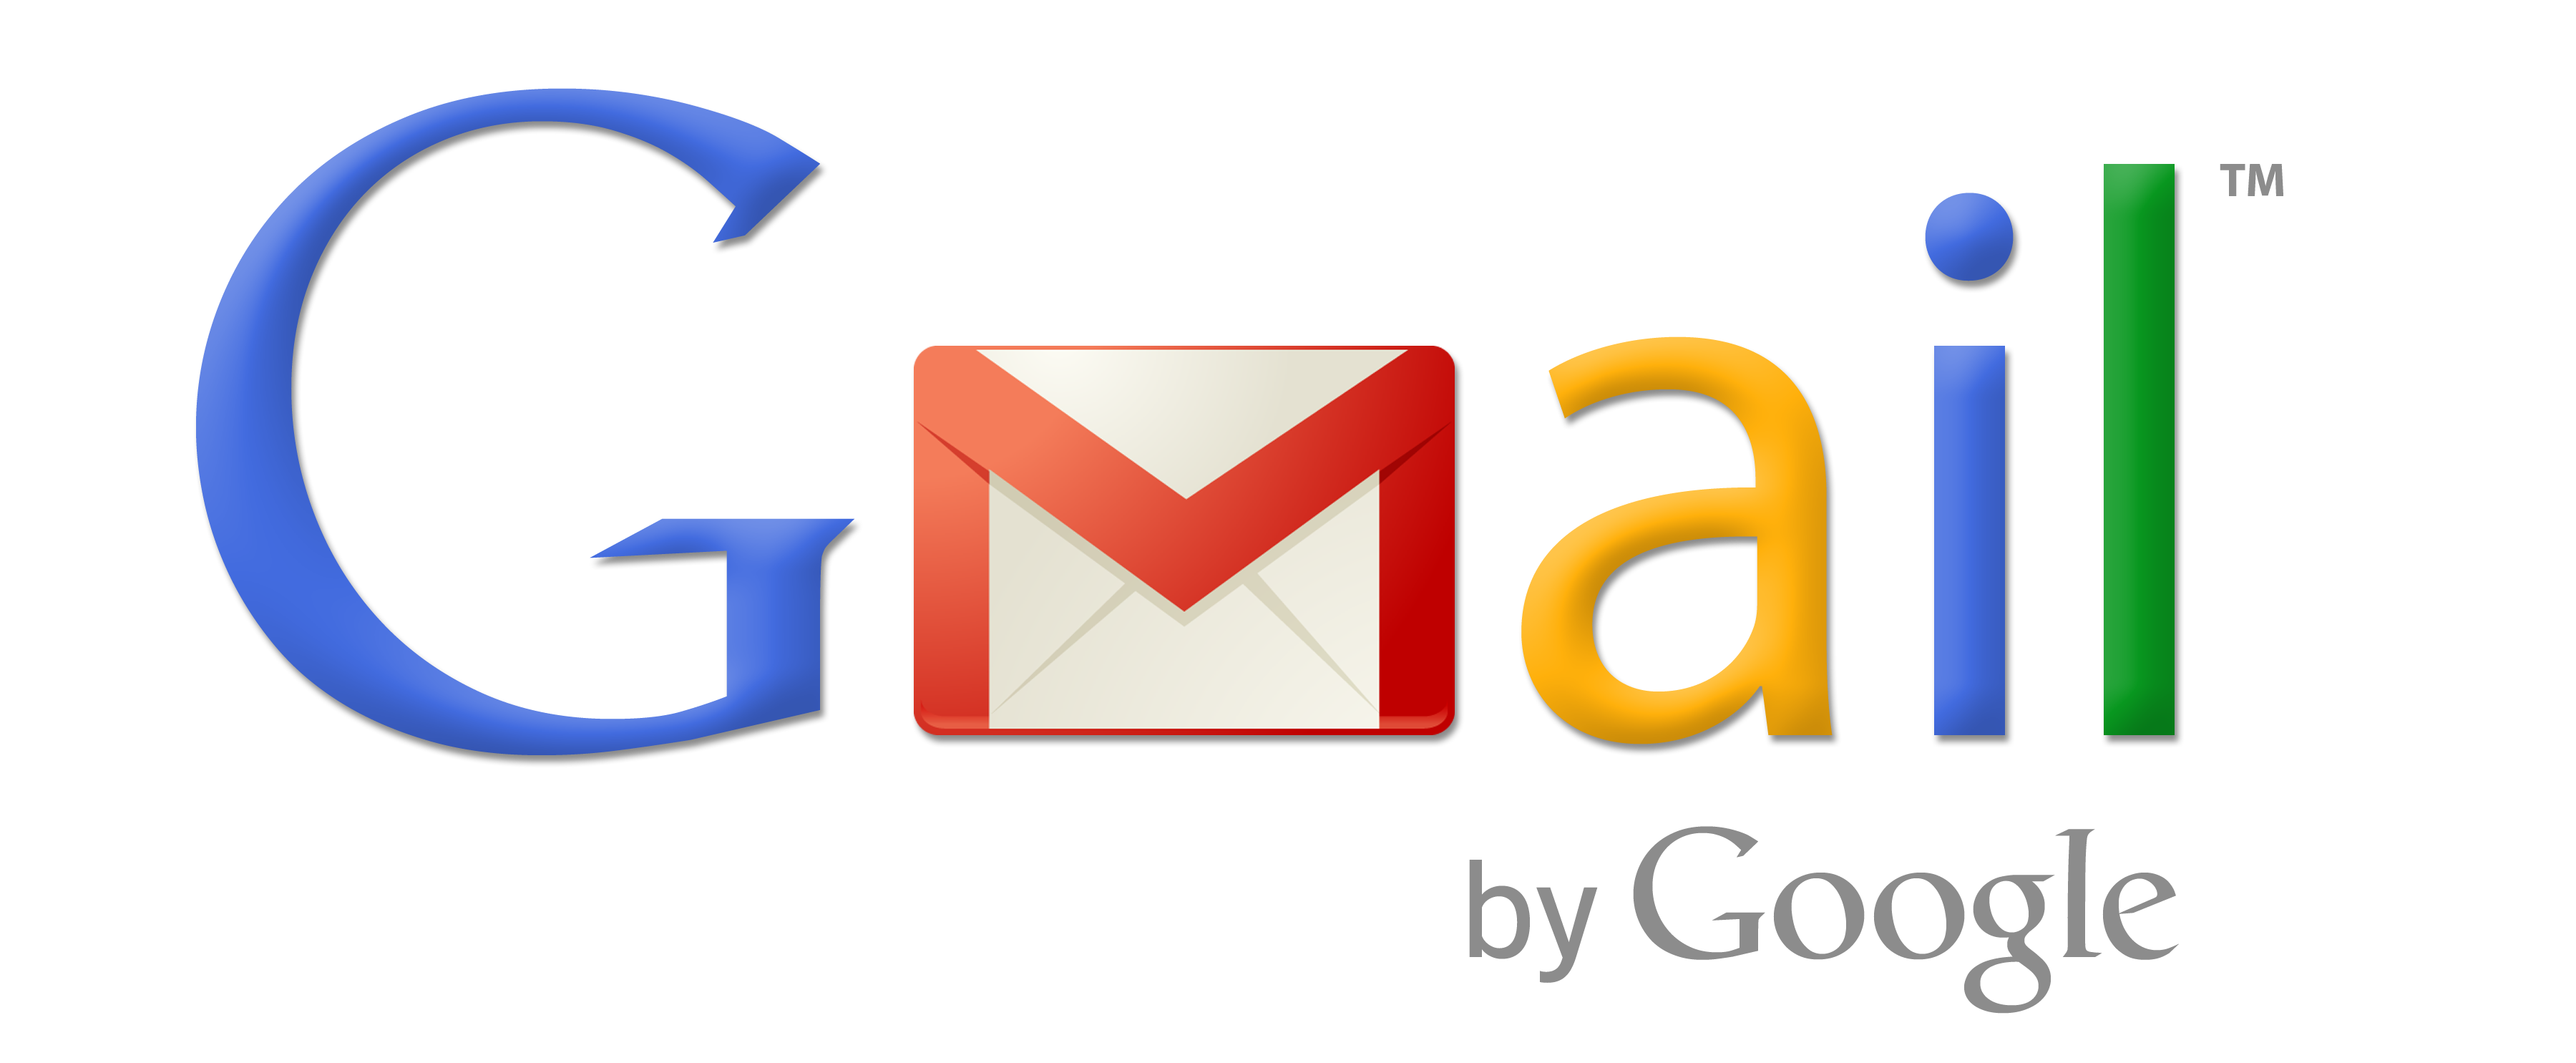 Gmail By Google PNG